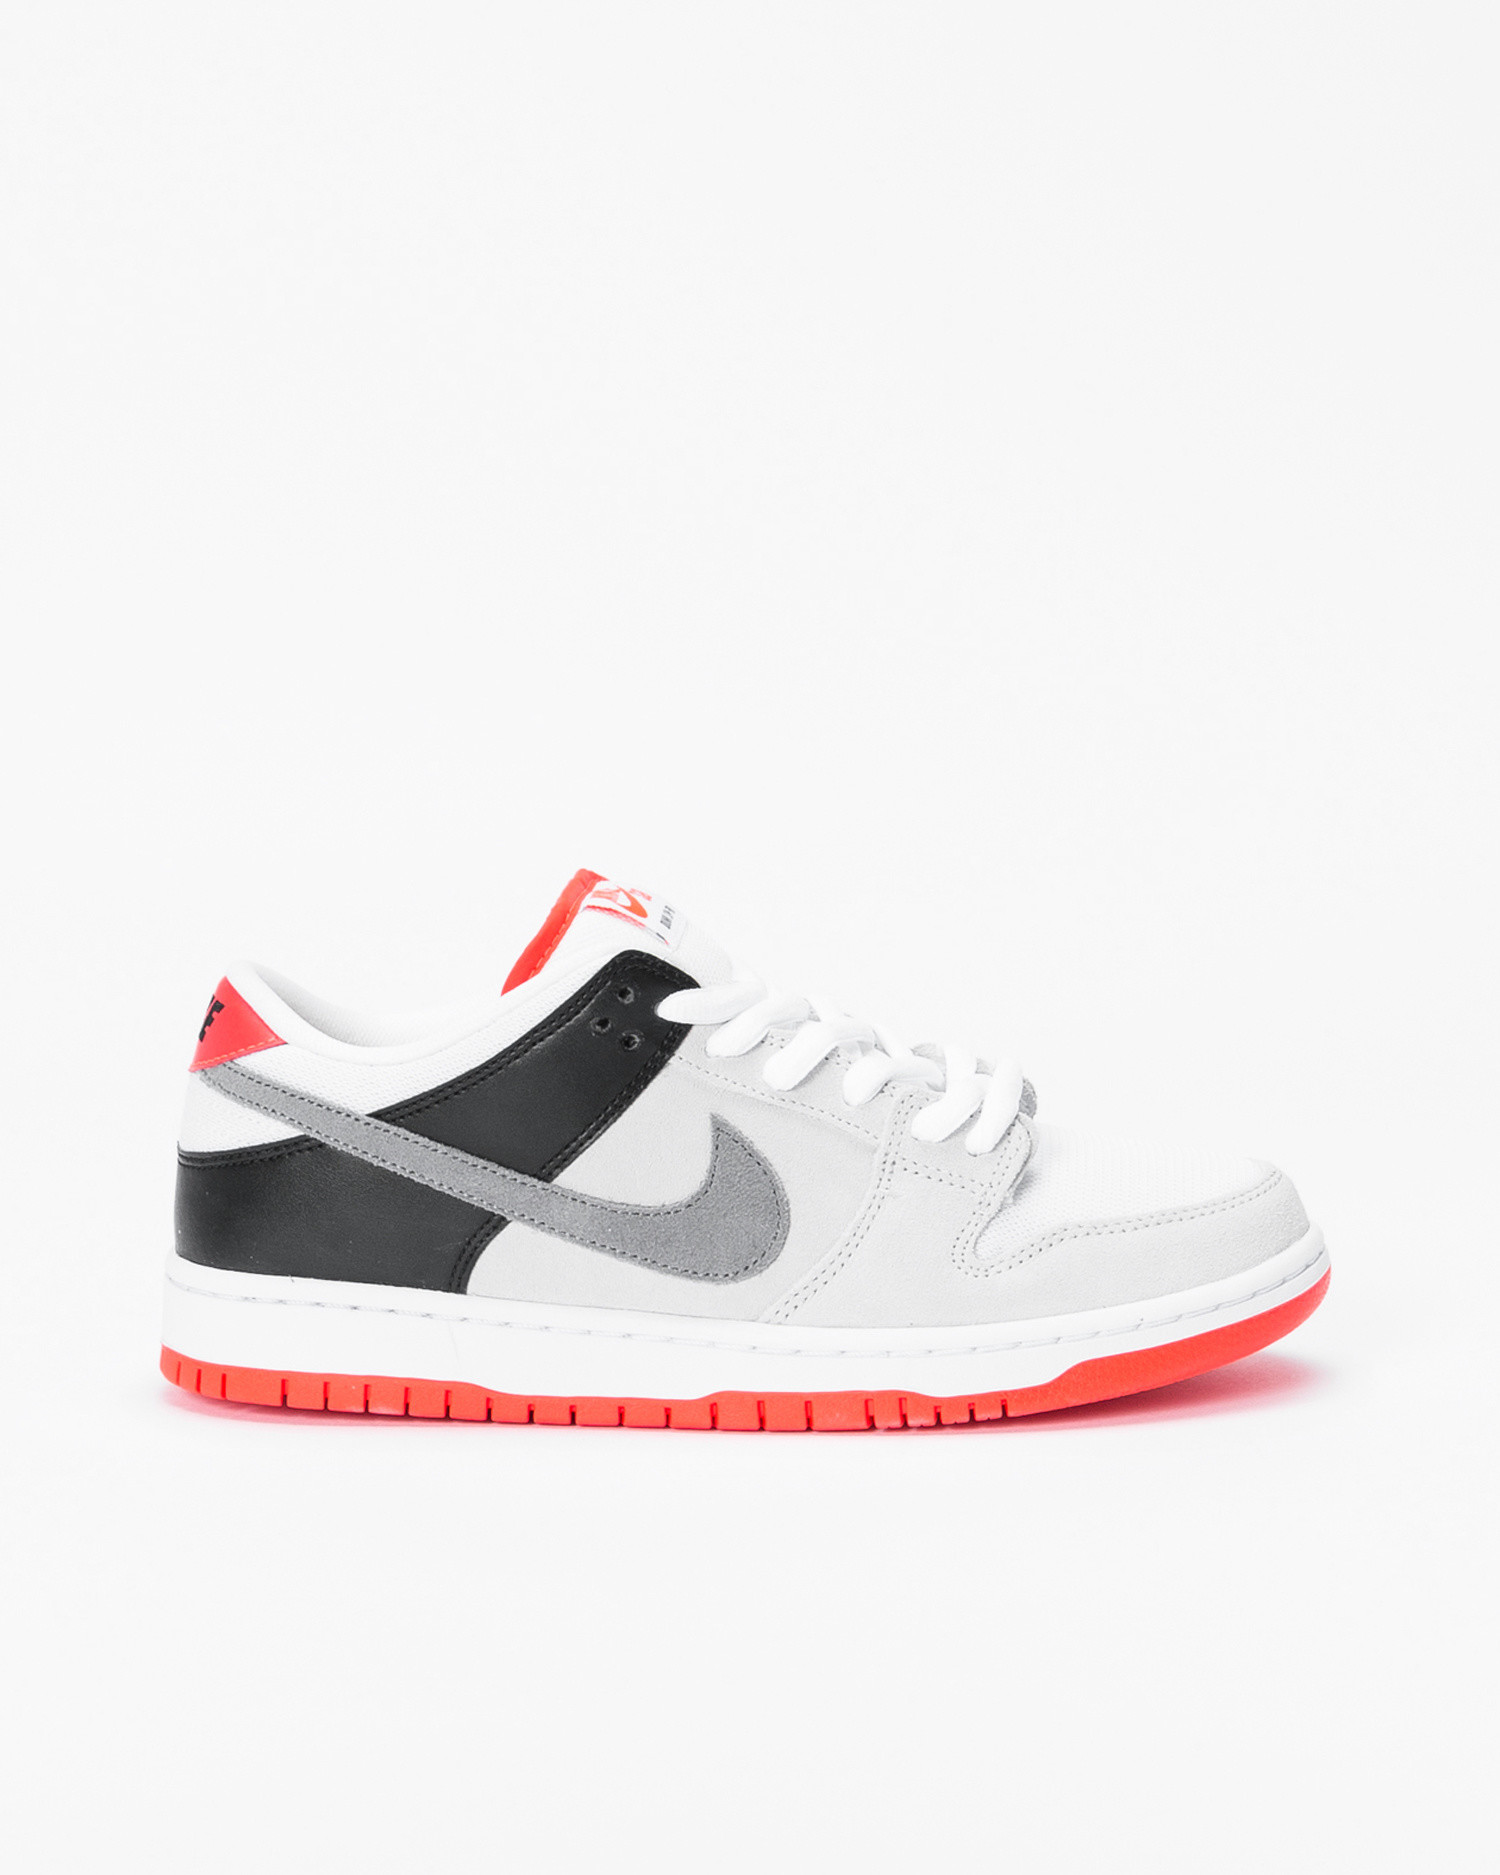 Nike Sb Dunk Low Pro Iso Neutral Grey Cool Grey Black Infrared